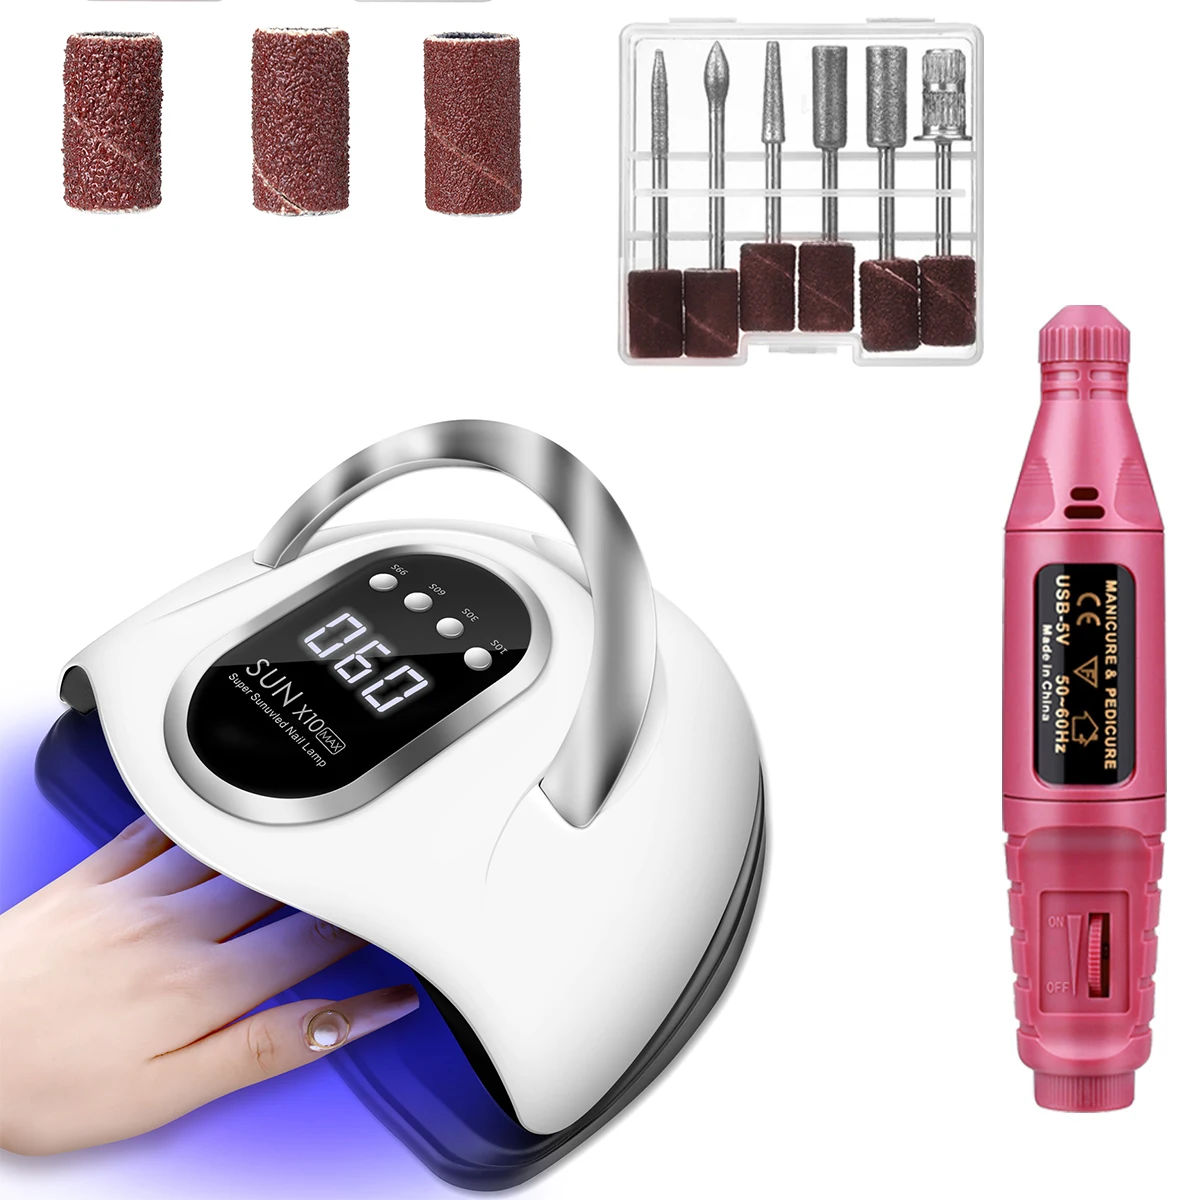 

Monja 2pcs Nail Sets 280W Nail Dryer Lamp Electric Drill Machine Acrylic Remover Trimming Cure Manicure Design Tools Devices Kit